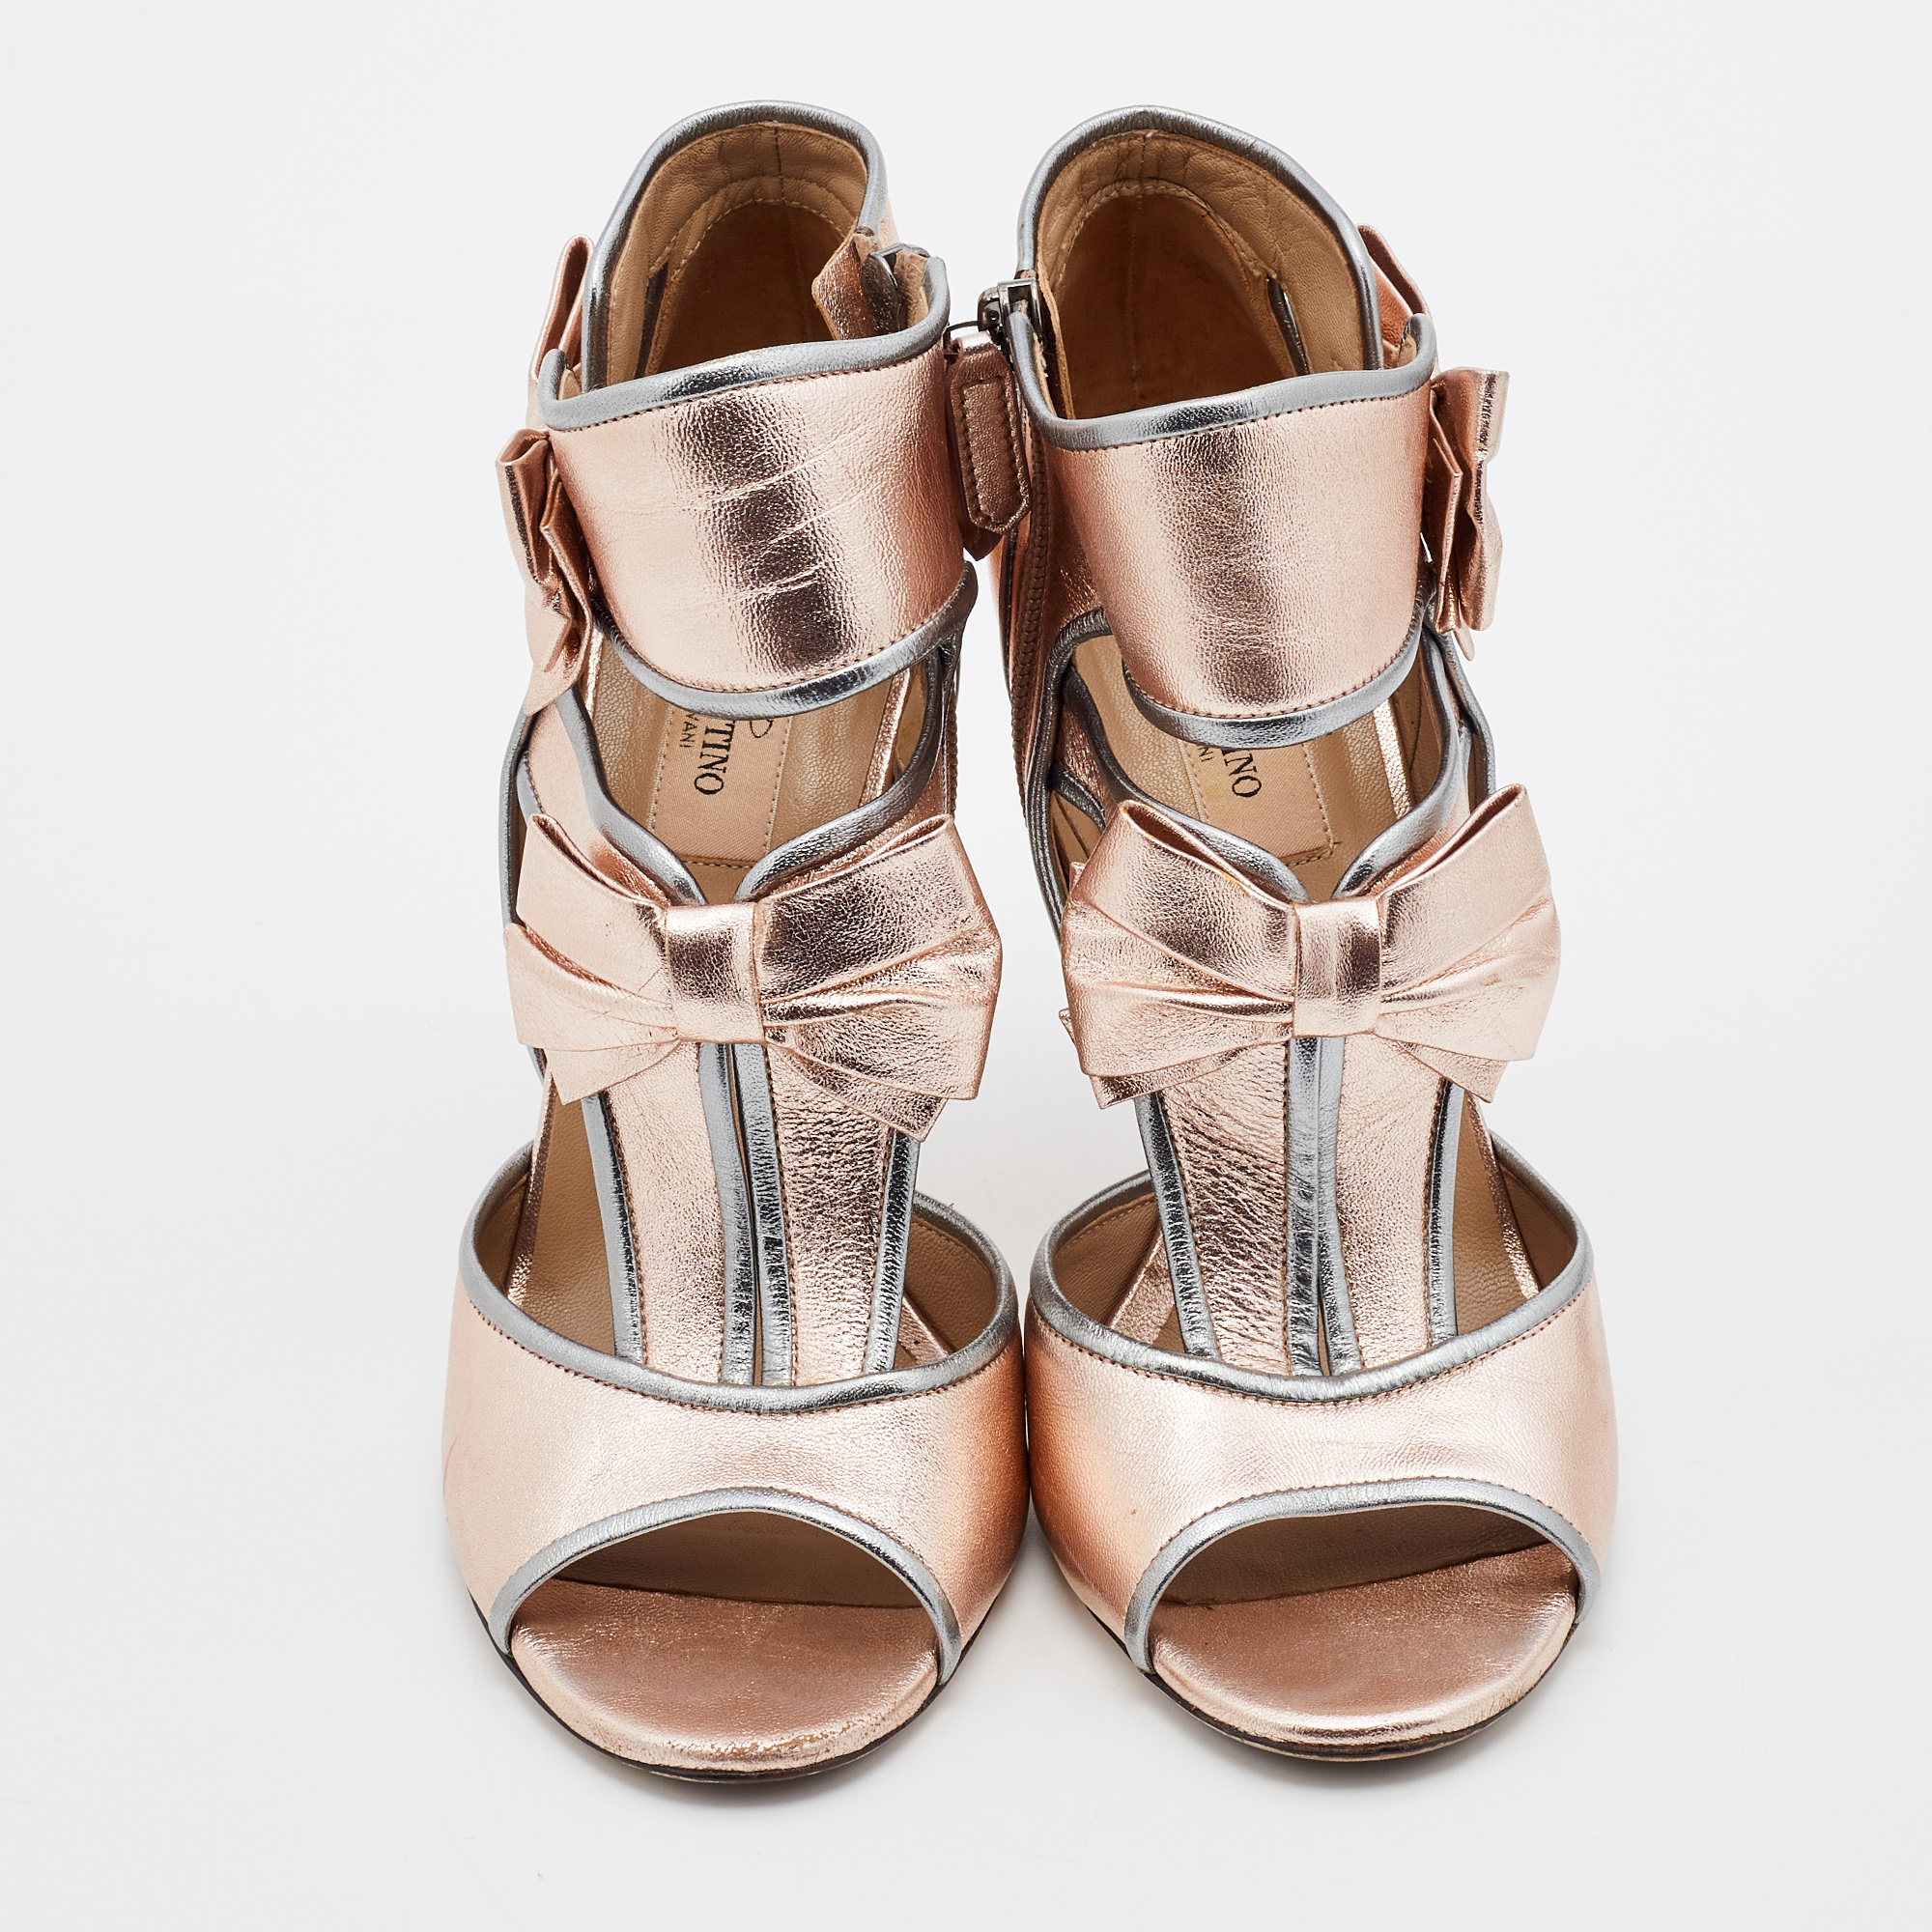 Valentino Metallic Pink/Grey Leather Bow Open Toe Ankle Strap Sandals Size 40